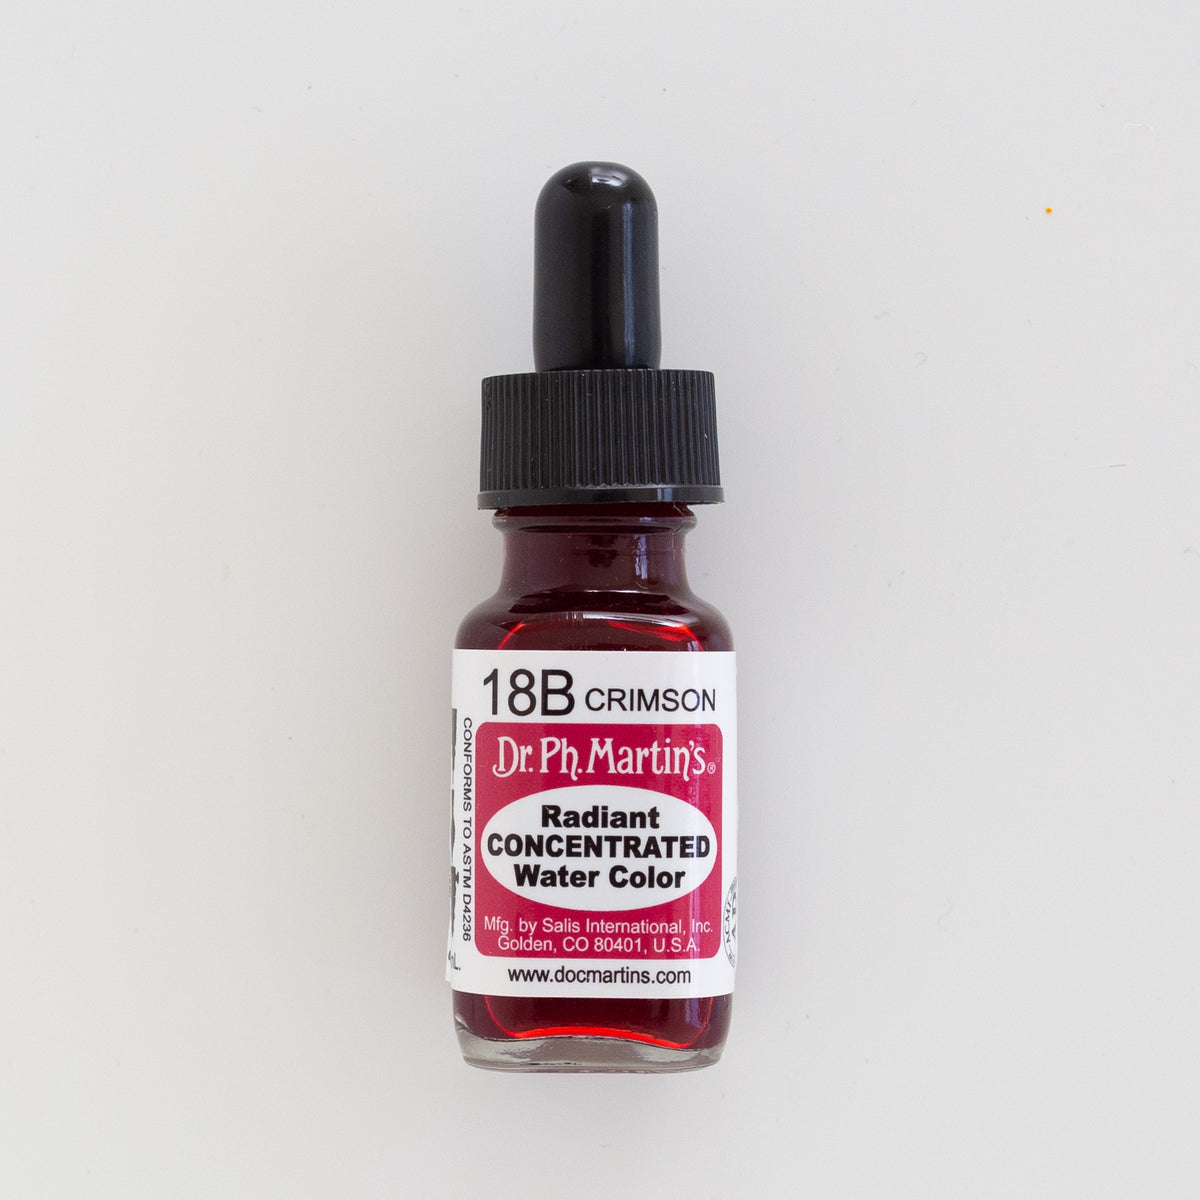 Dr. Ph. Martin’s Radiant Concentrated 18B Crimson